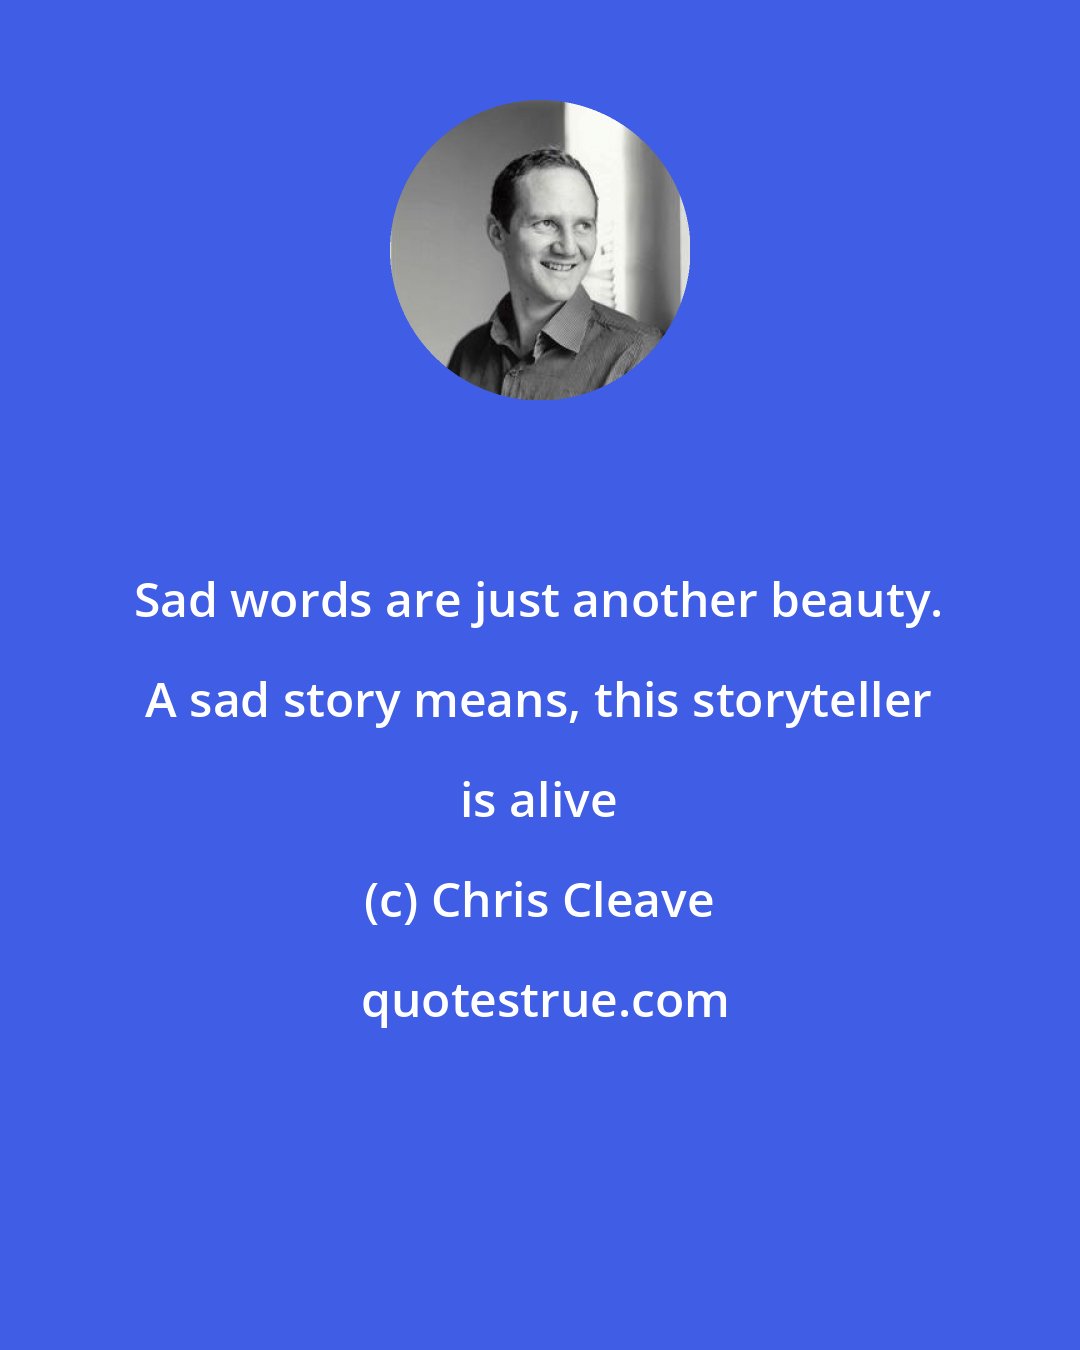 Chris Cleave: Sad words are just another beauty. A sad story means, this storyteller is alive